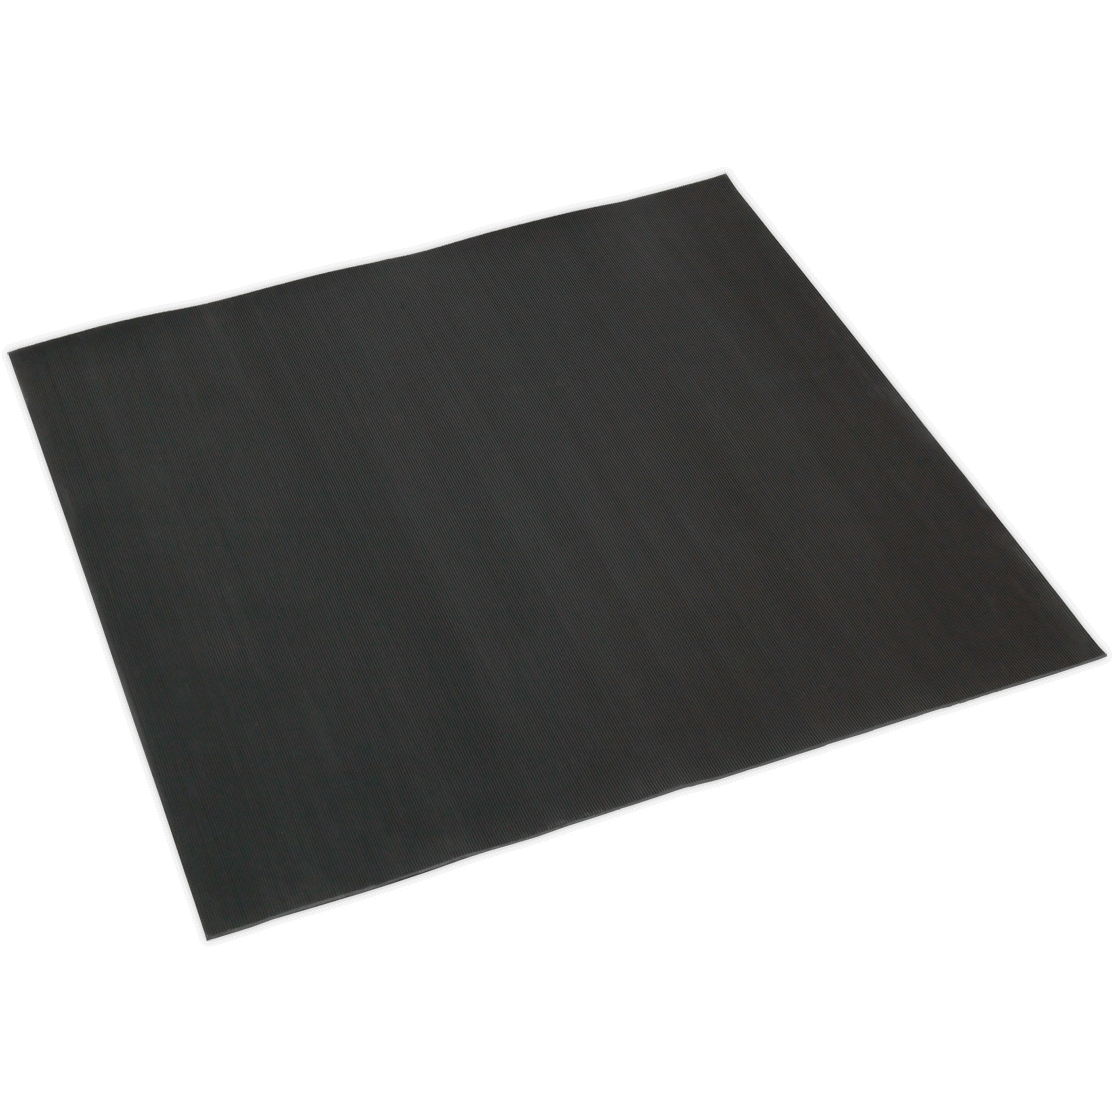 Photos - Car Service Station Equipment Sealey Electrician's Insulating Rubber Safety Mat HVM17K02 